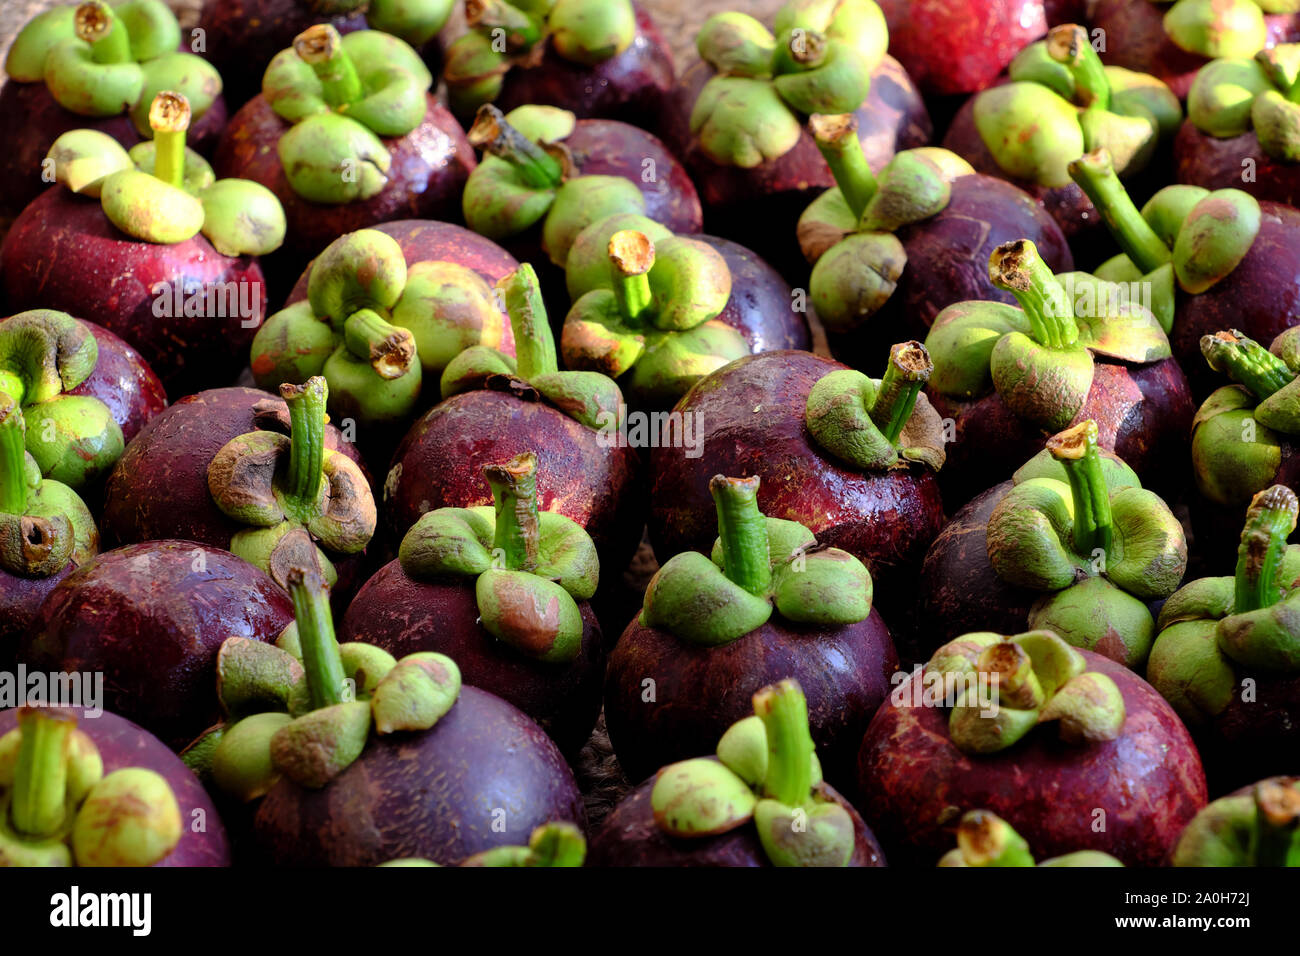 High view many fresh Mangosteens fruit, Vietnamese tropical fruits that nutrition, sweet Stock Photo